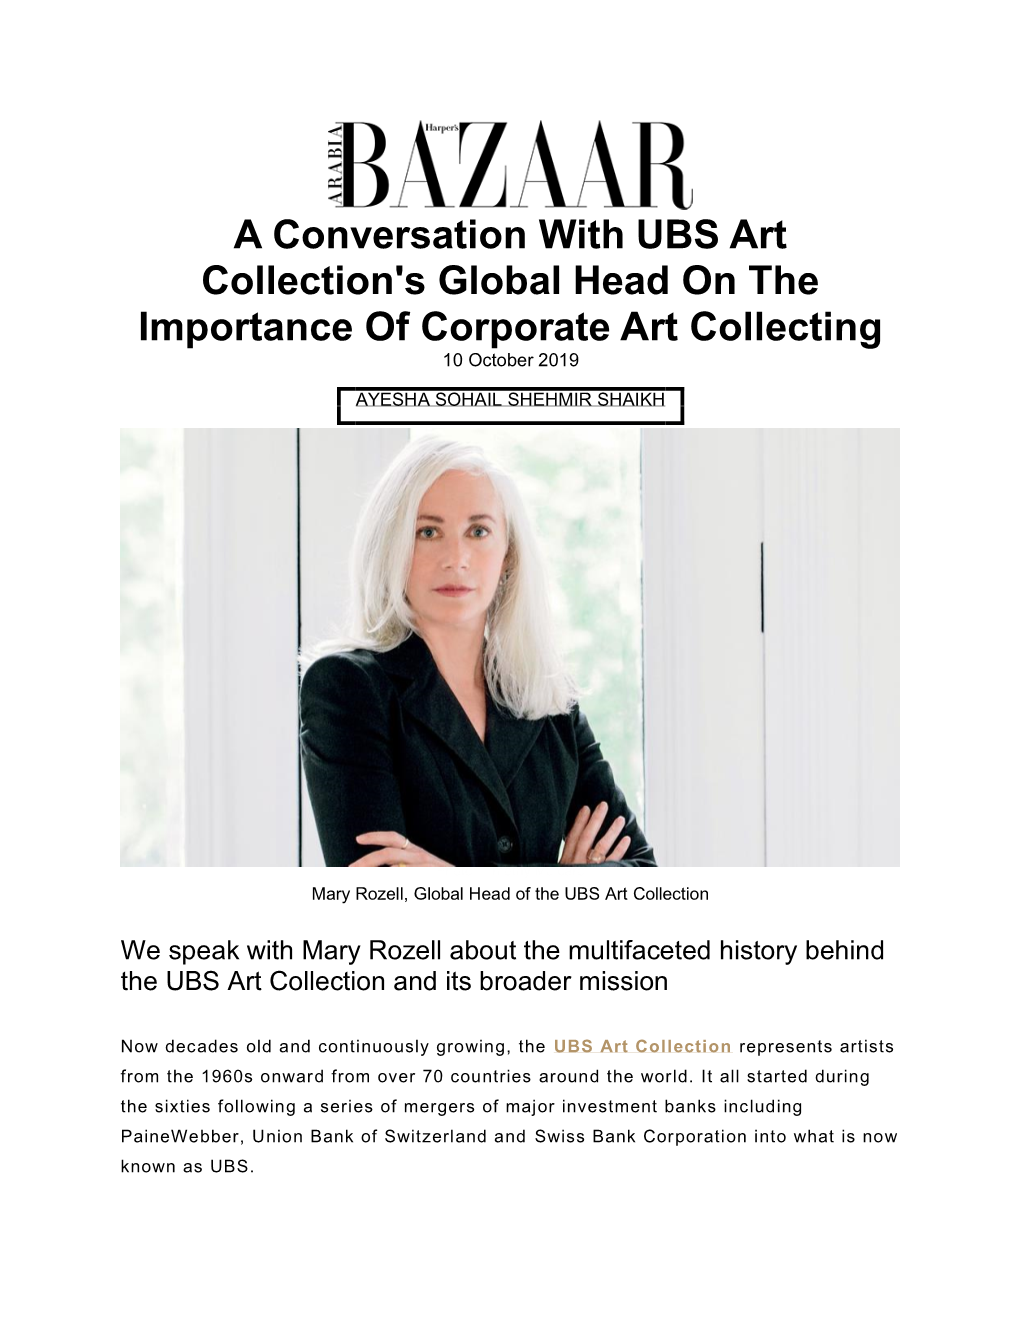 A Conversation with UBS Art Collection's Global Head on the Importance of Corporate Art Collecting 10 October 2019